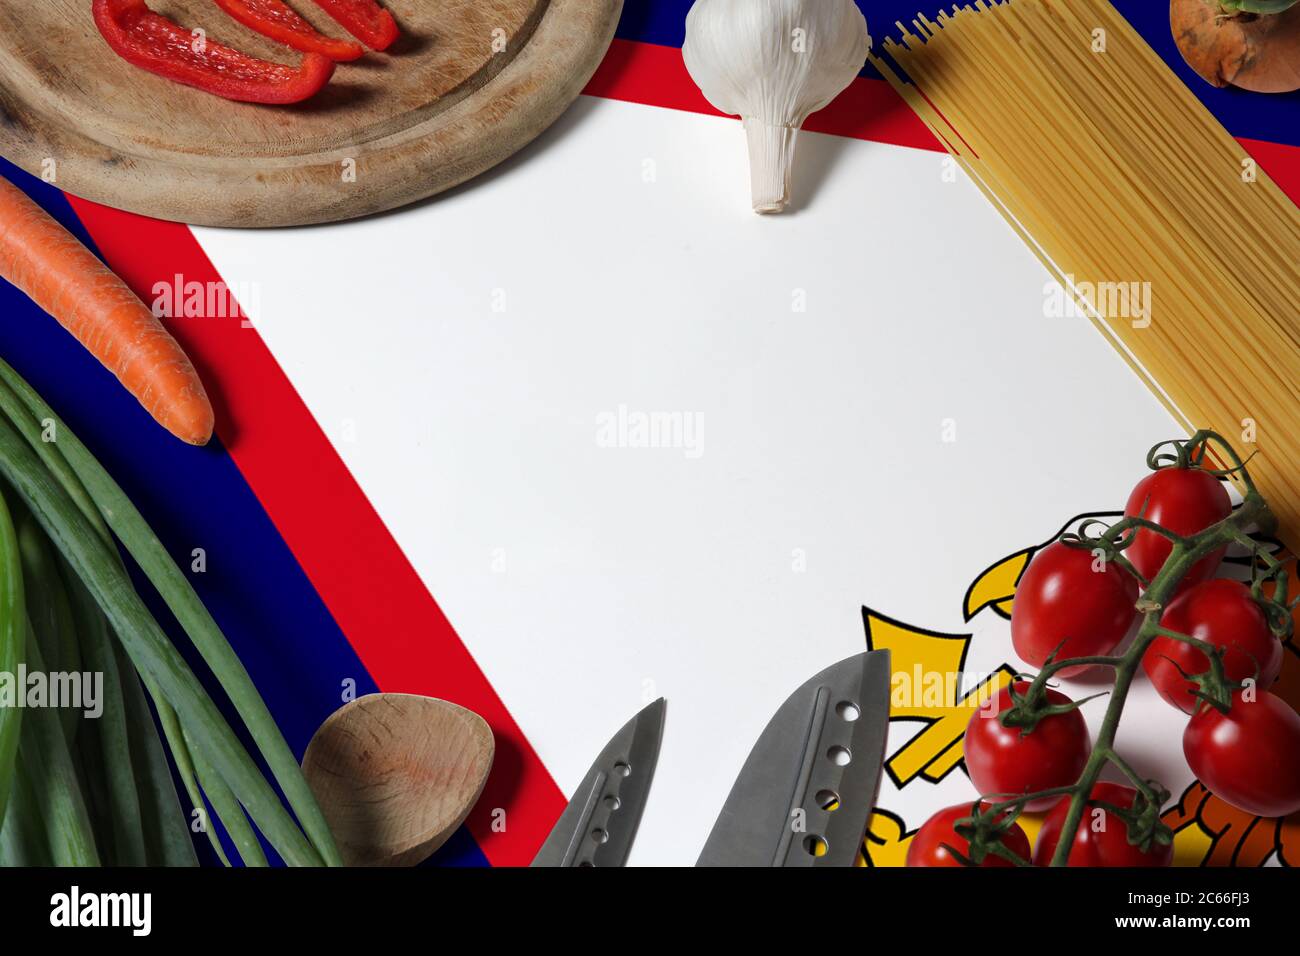 American Samoa flag on fresh vegetables and knife concept wooden table. Cooking concept with preparing background theme. Stock Photo